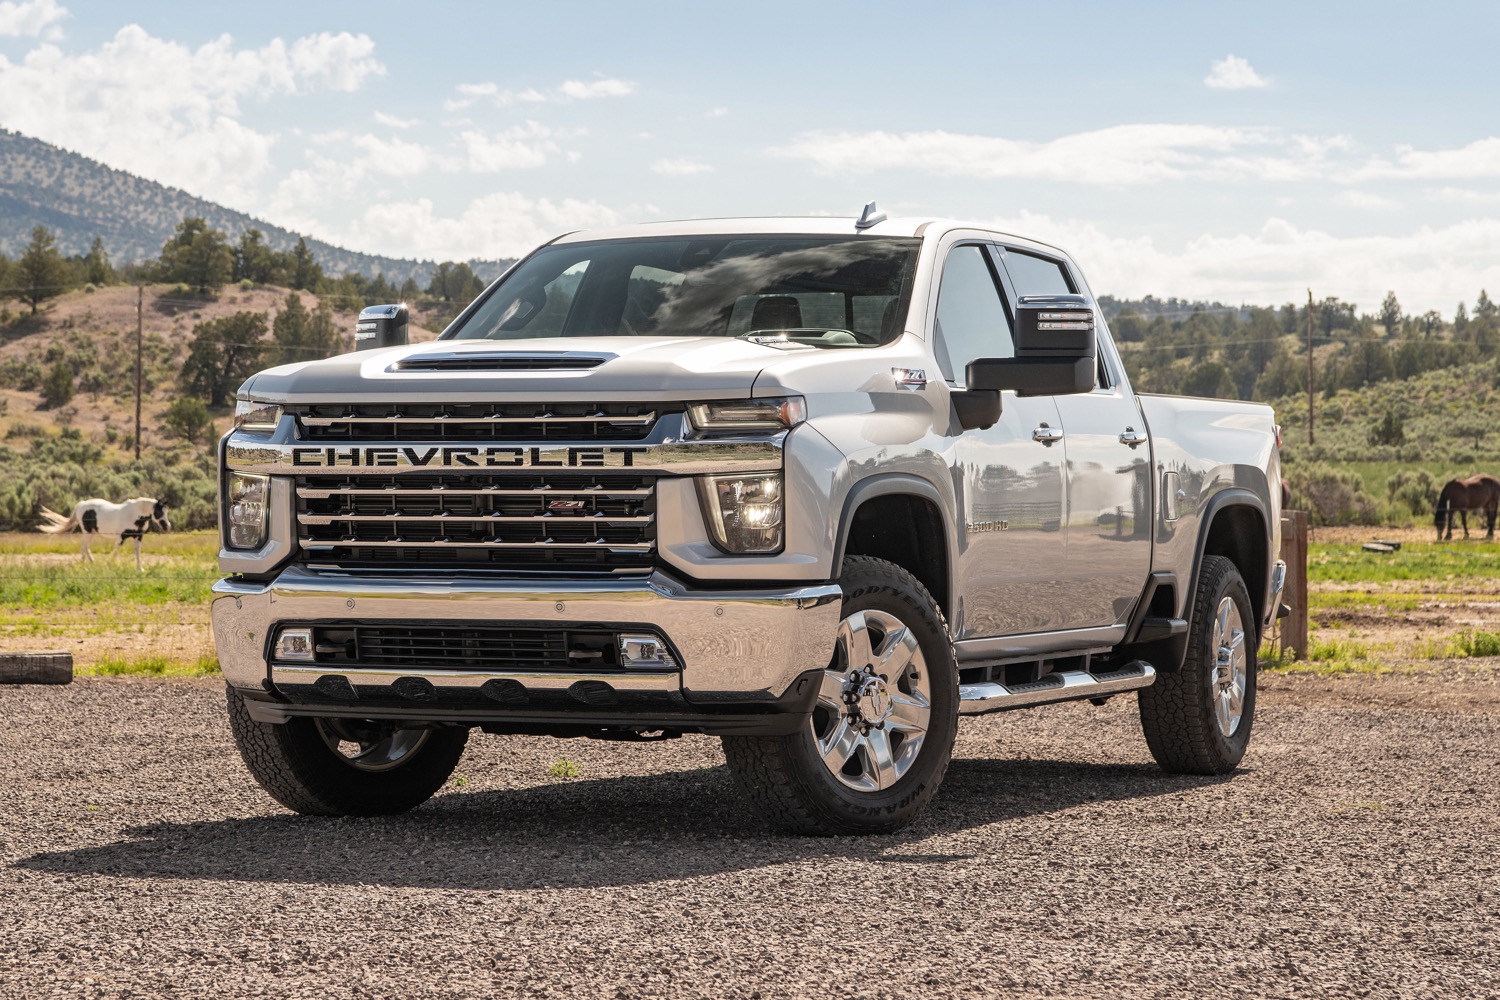 Chevy Silverado HD Discount Offers Up To $750 Off March 2023